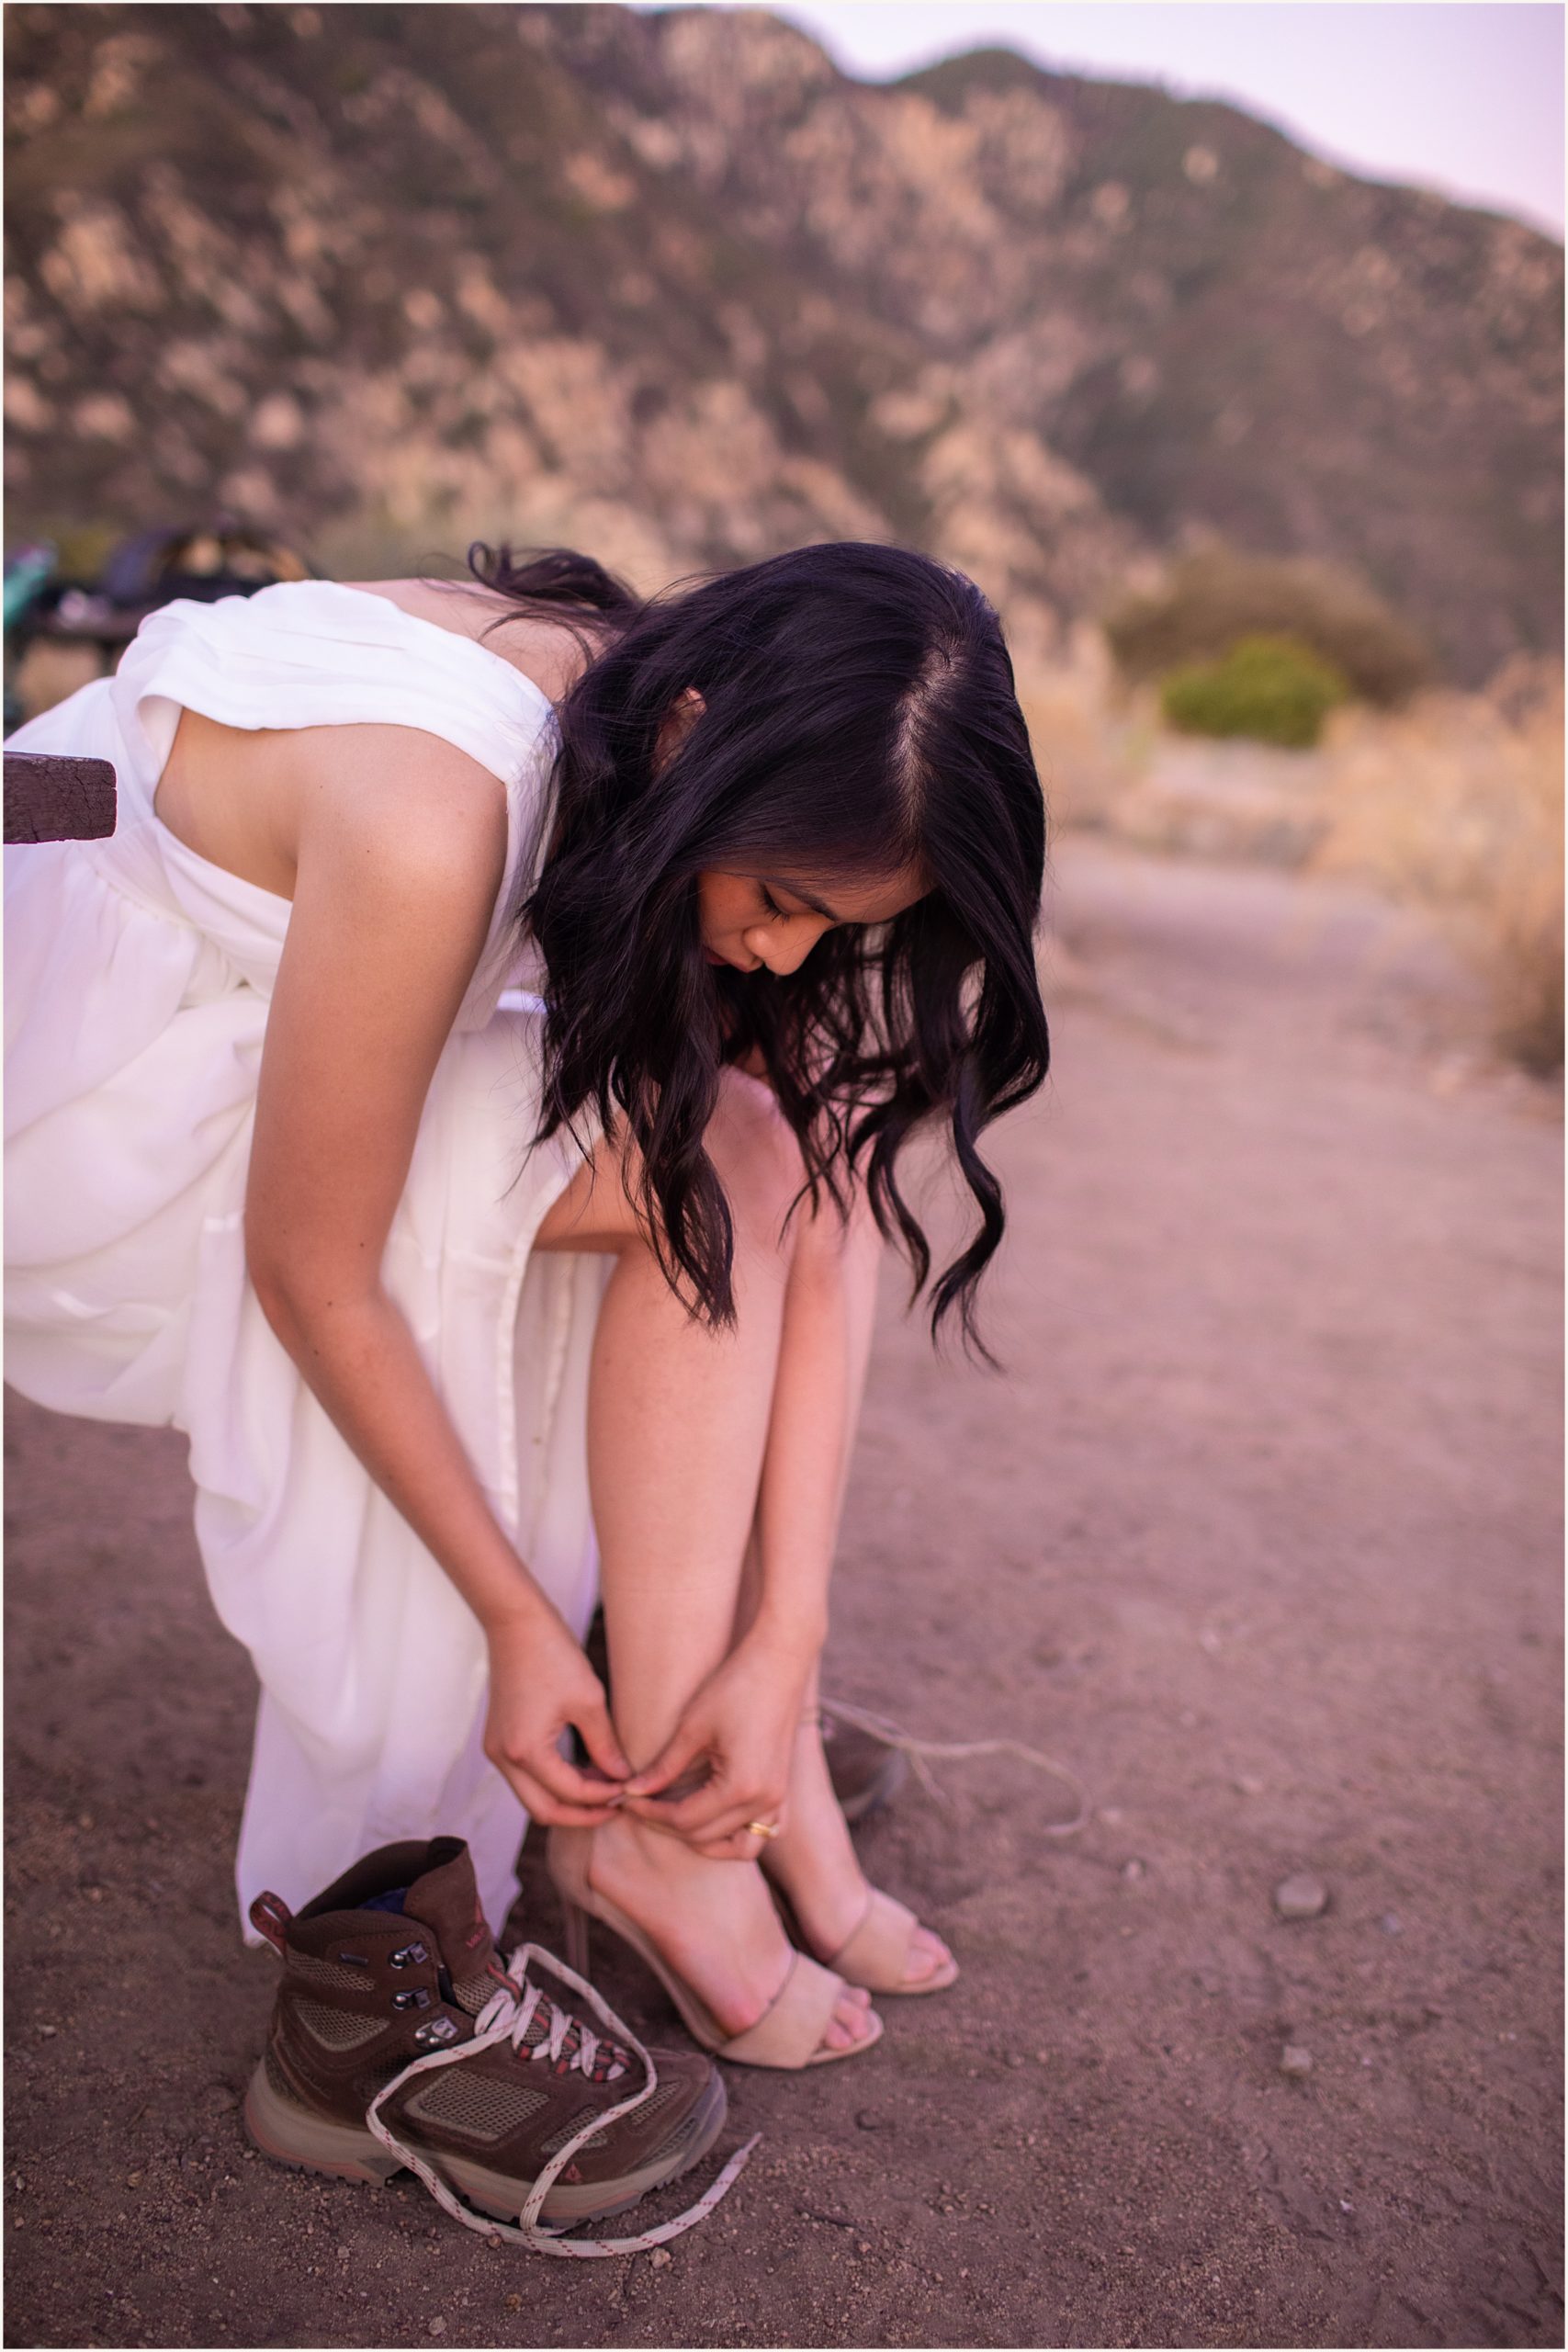 hang-and-Matt_0013 6 Adventure Elopement Tips: How to Stay Looking Fresh for Your Hiking Elopement